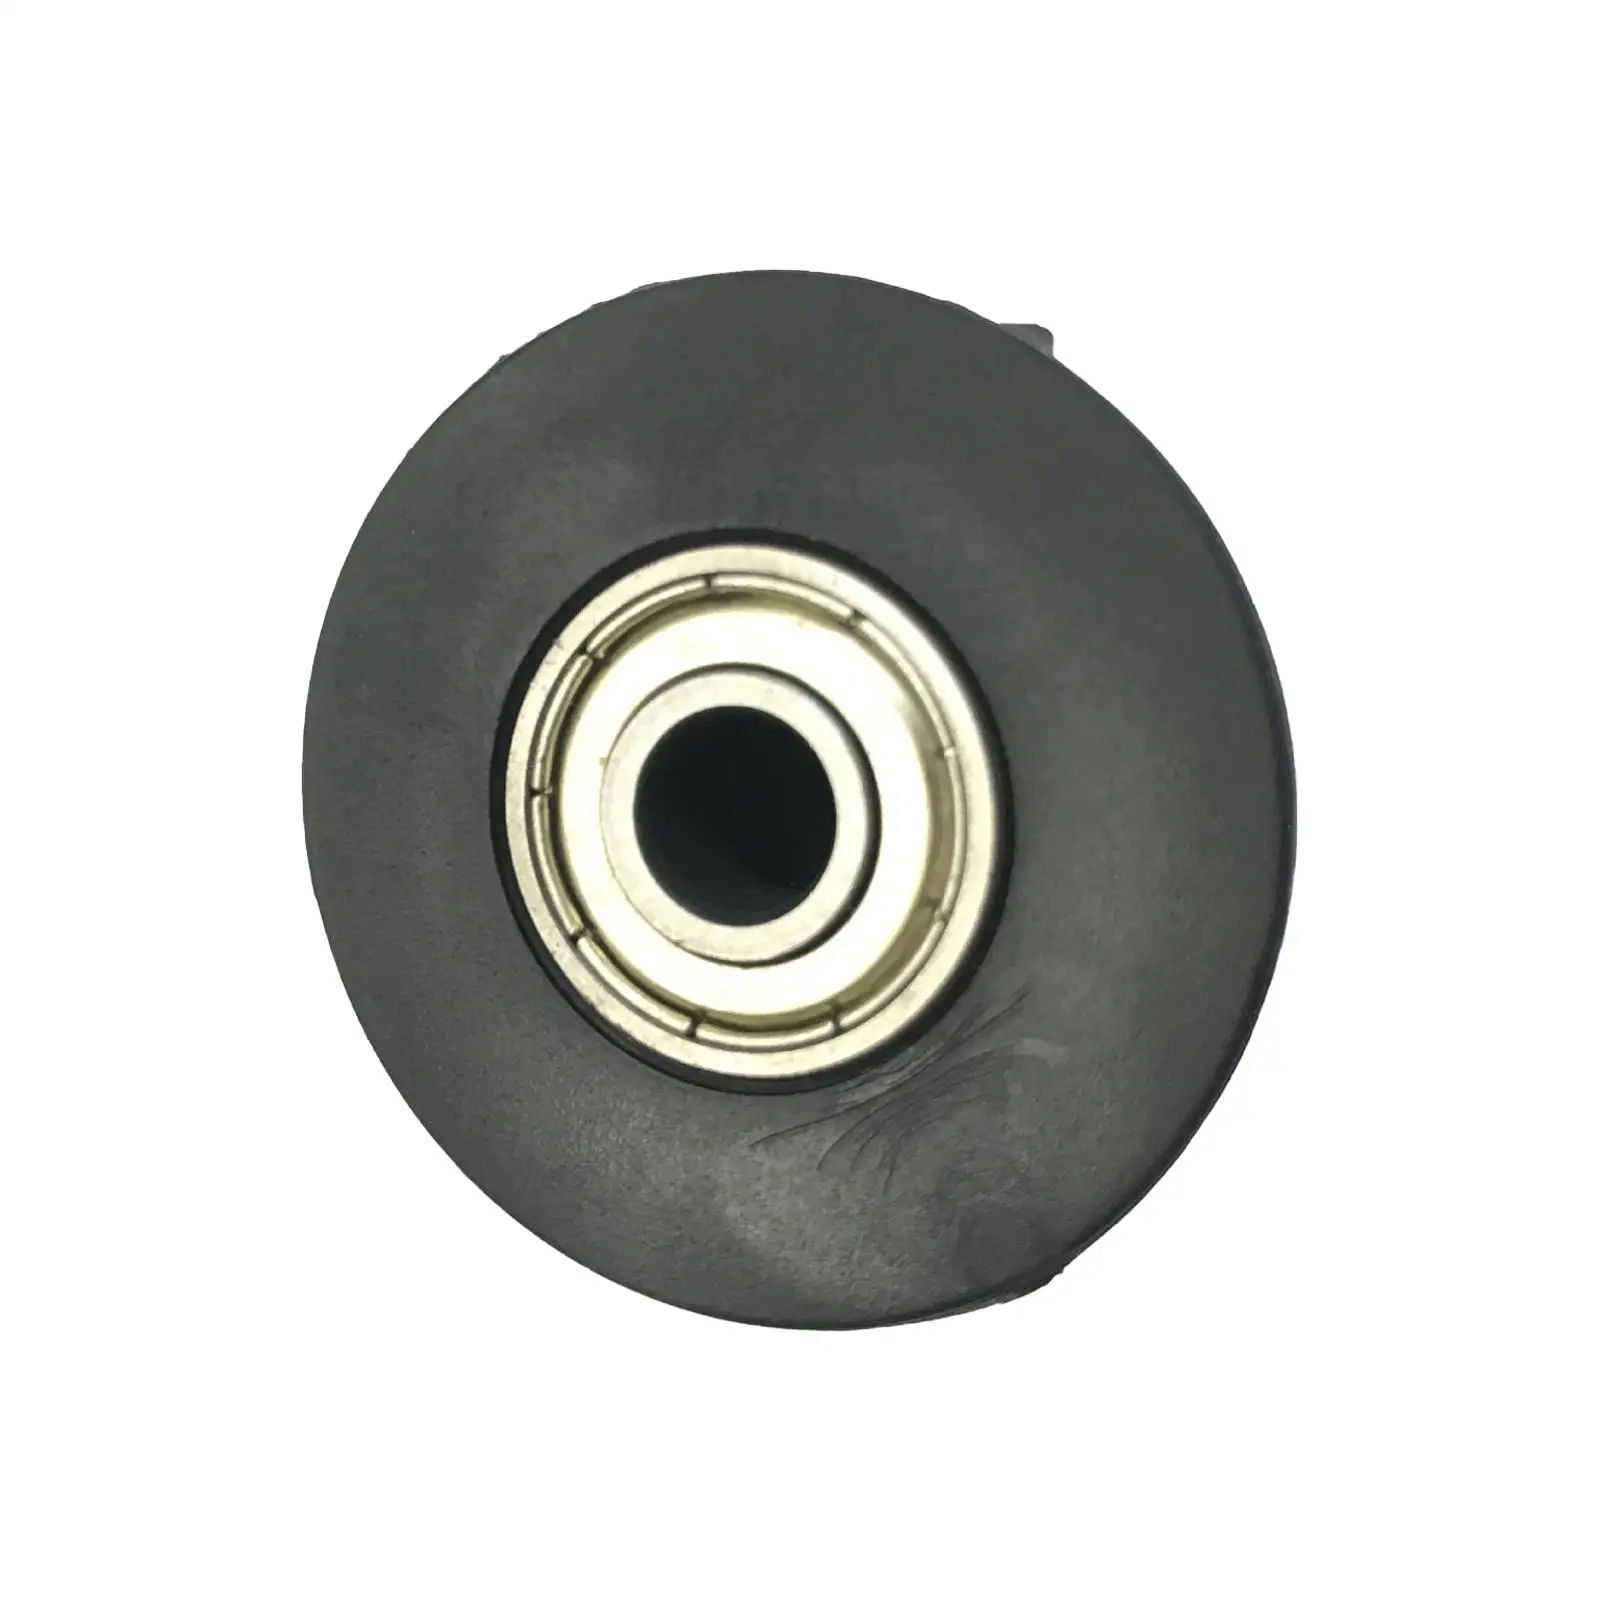 Rowing Machine Bearing Wheel Easy to Install Abdominal Machine Pulley for Fitness Parts